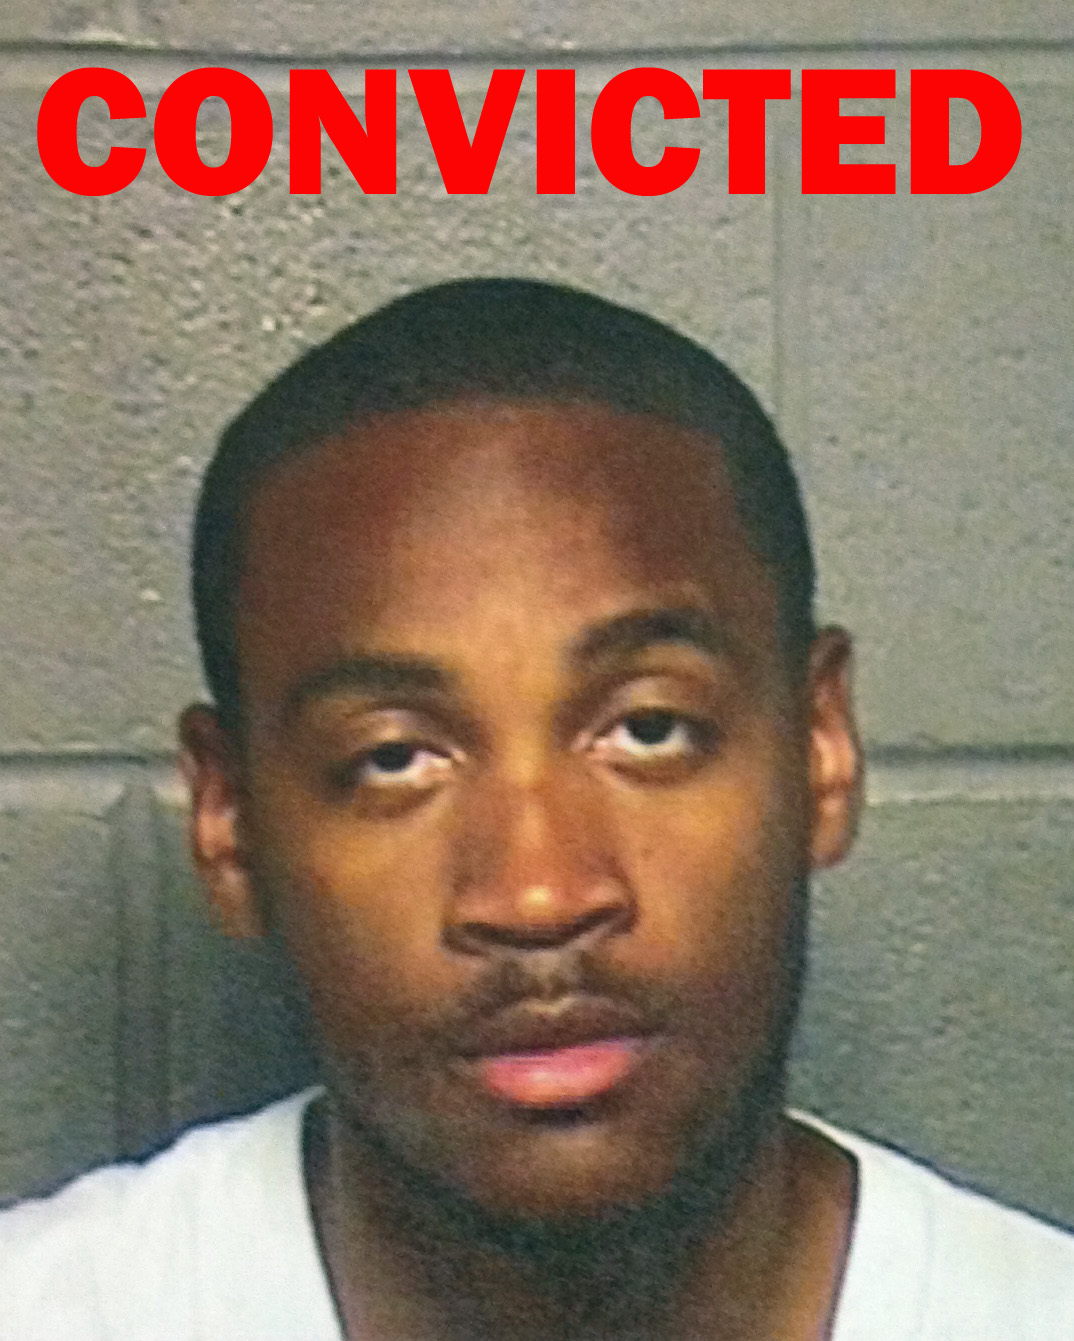 Donald Raynor was convicted of Murder in the homicide of Delano Gray.